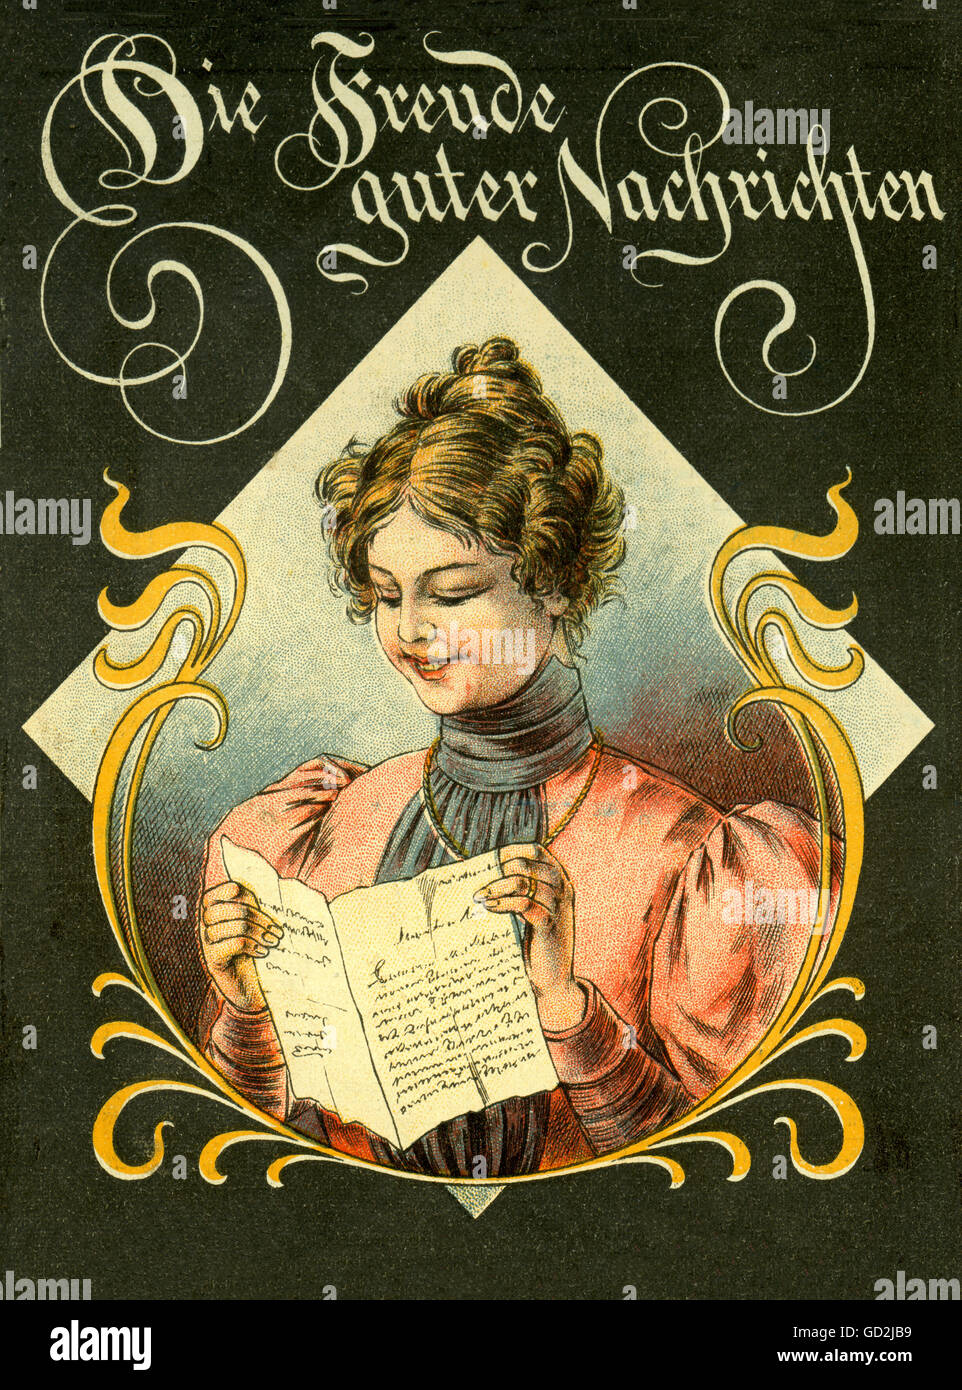 people, women, 'Die Freude guter Nachrichten' (The joy about good news), woman is reading a letter, Germany, 1898, Additional-Rights-Clearences-Not Available Stock Photo